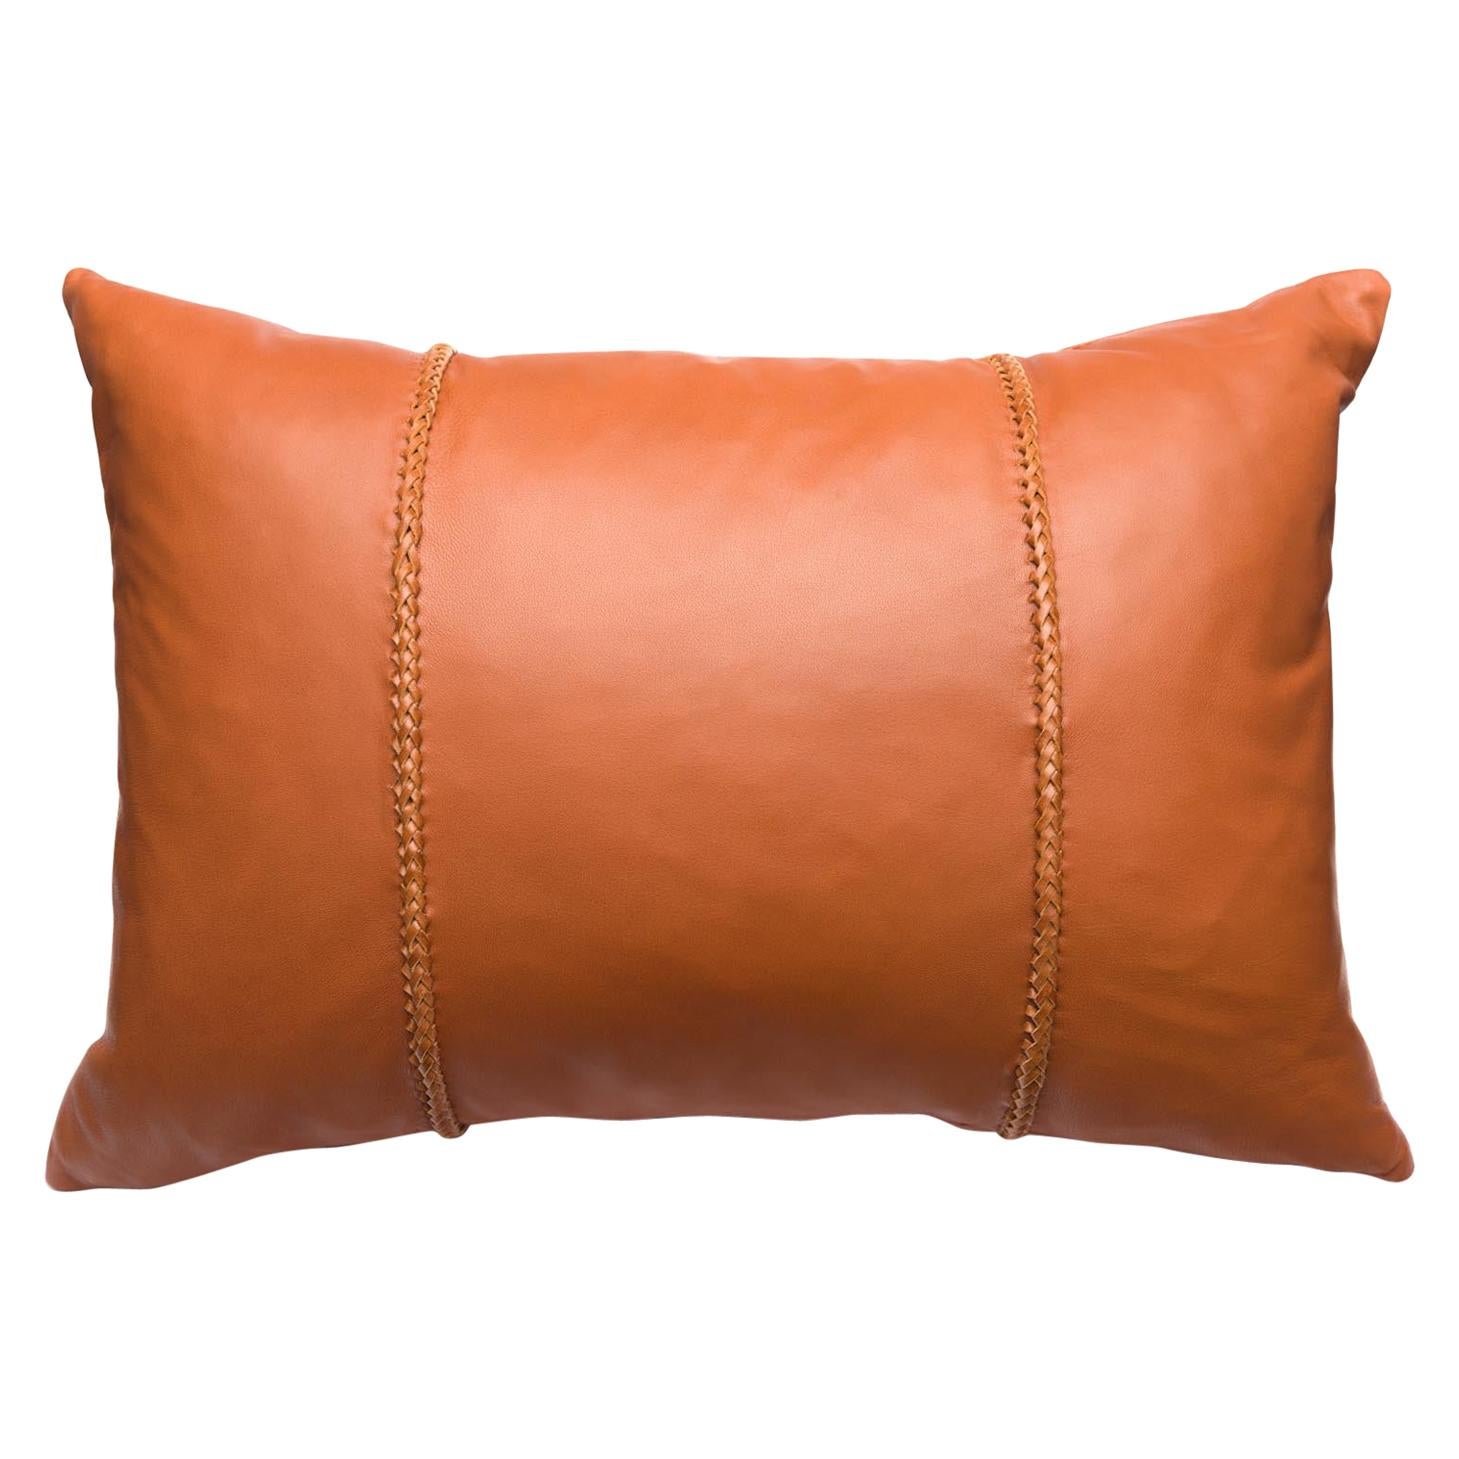 Cognac Brown Leather Pillow with Leather Cross Stitch Lumbar Cushion